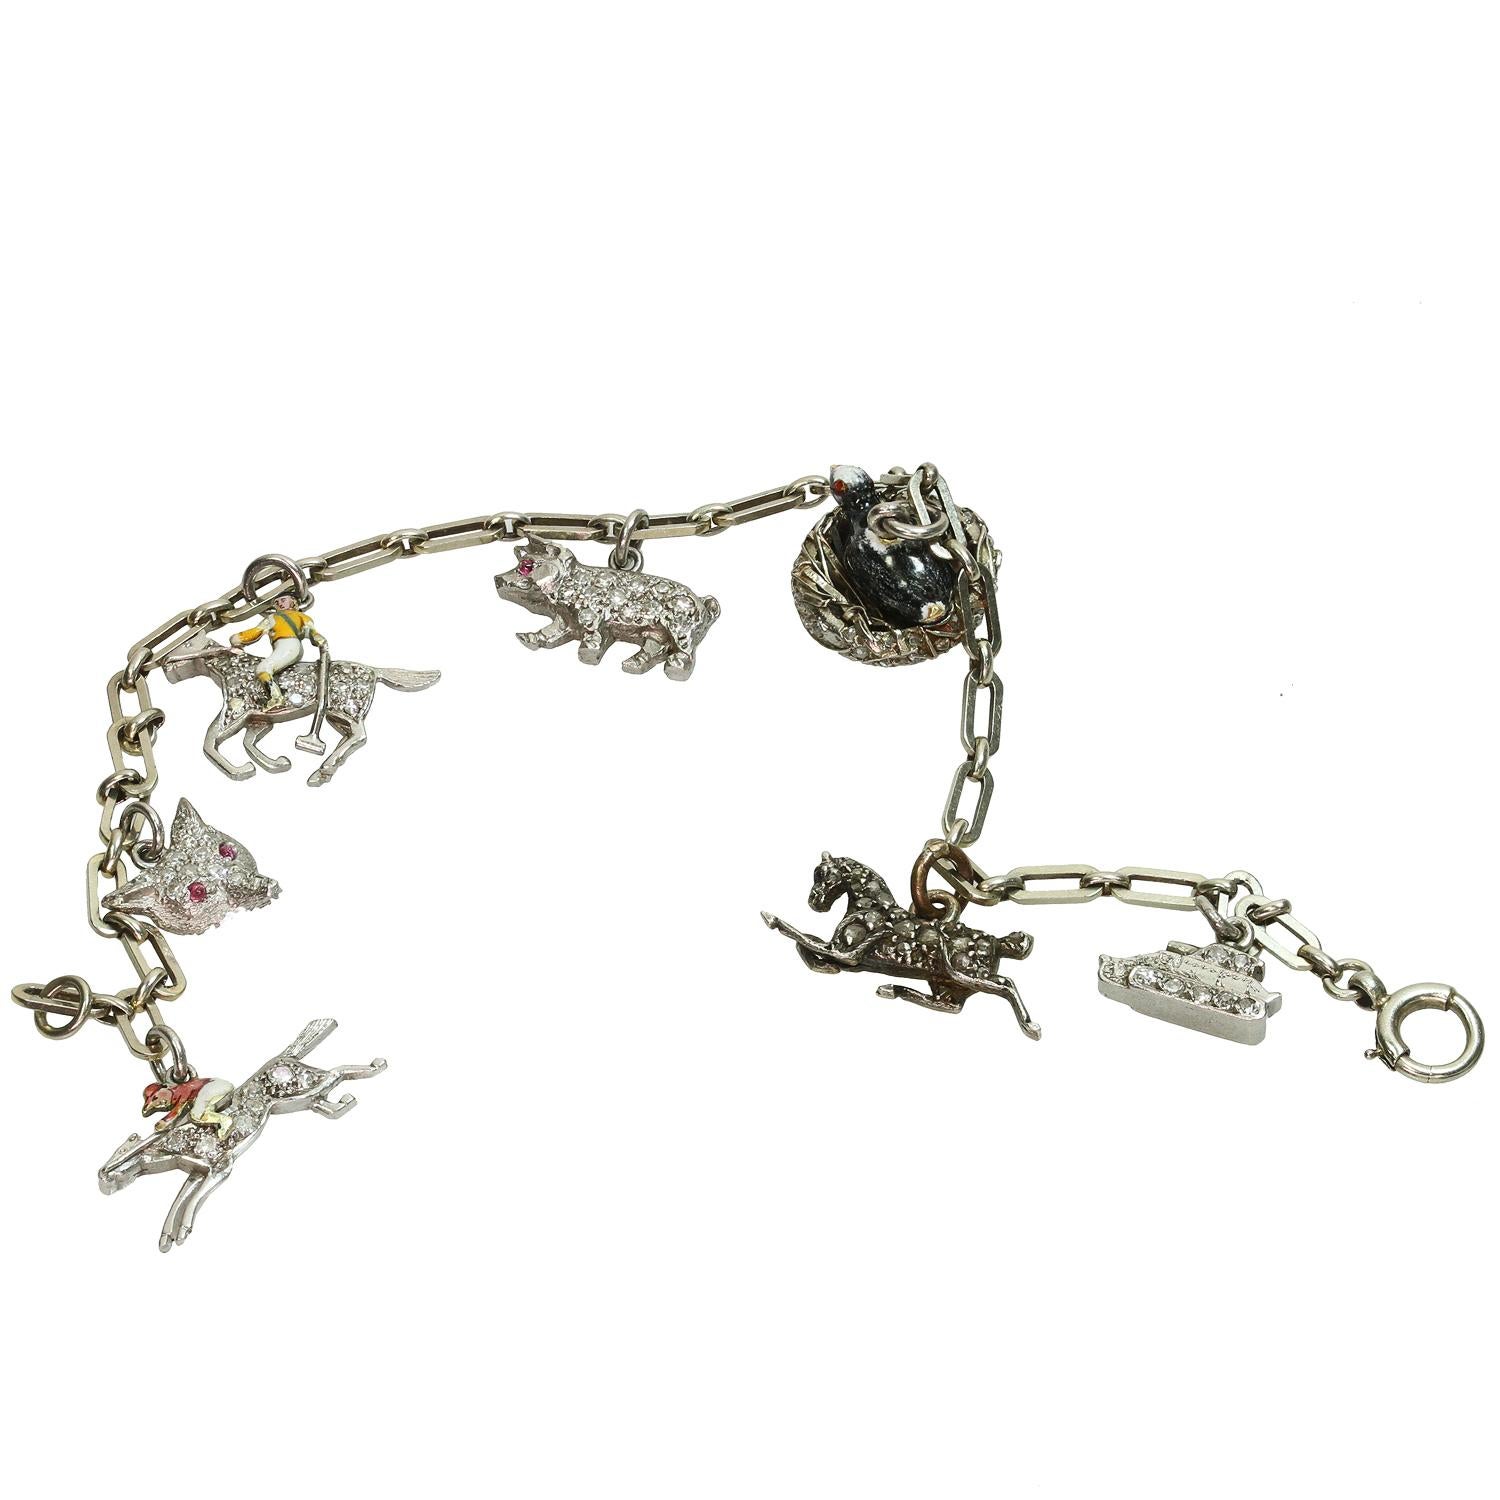 This antique hand-made link bracelet is crafted out of 9k white gold and features a total of 7 amazingly unique charms - two equestrians, a tank, a fox, a pig, a horse, a bird in a nest. Six charms are made of platinum while the horse charm is made